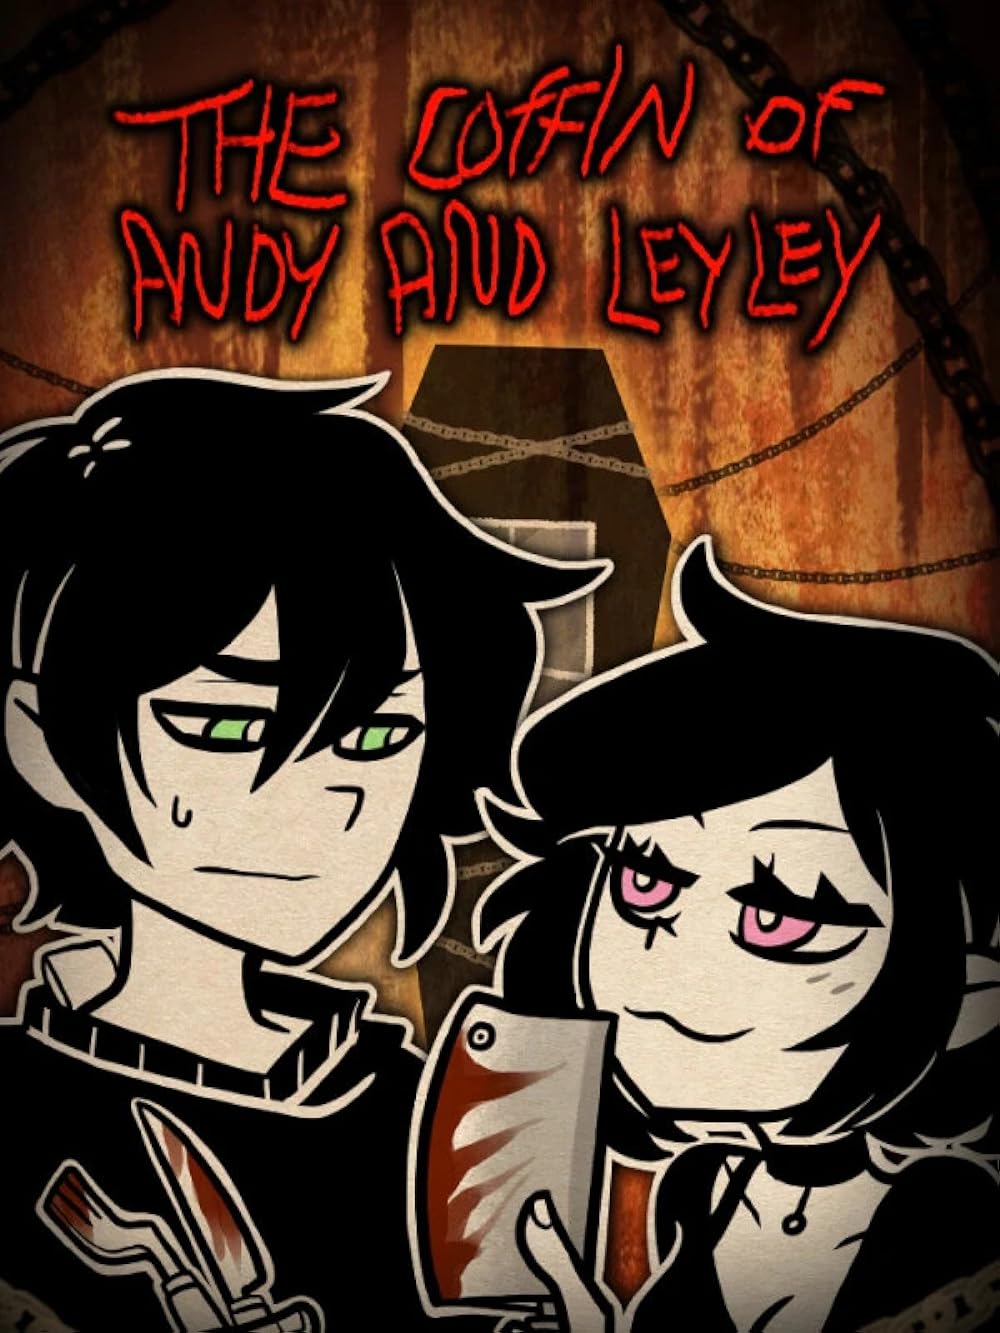 Impressions & Commentary: The Coffin of Andy and Leyley Chapters 1&2